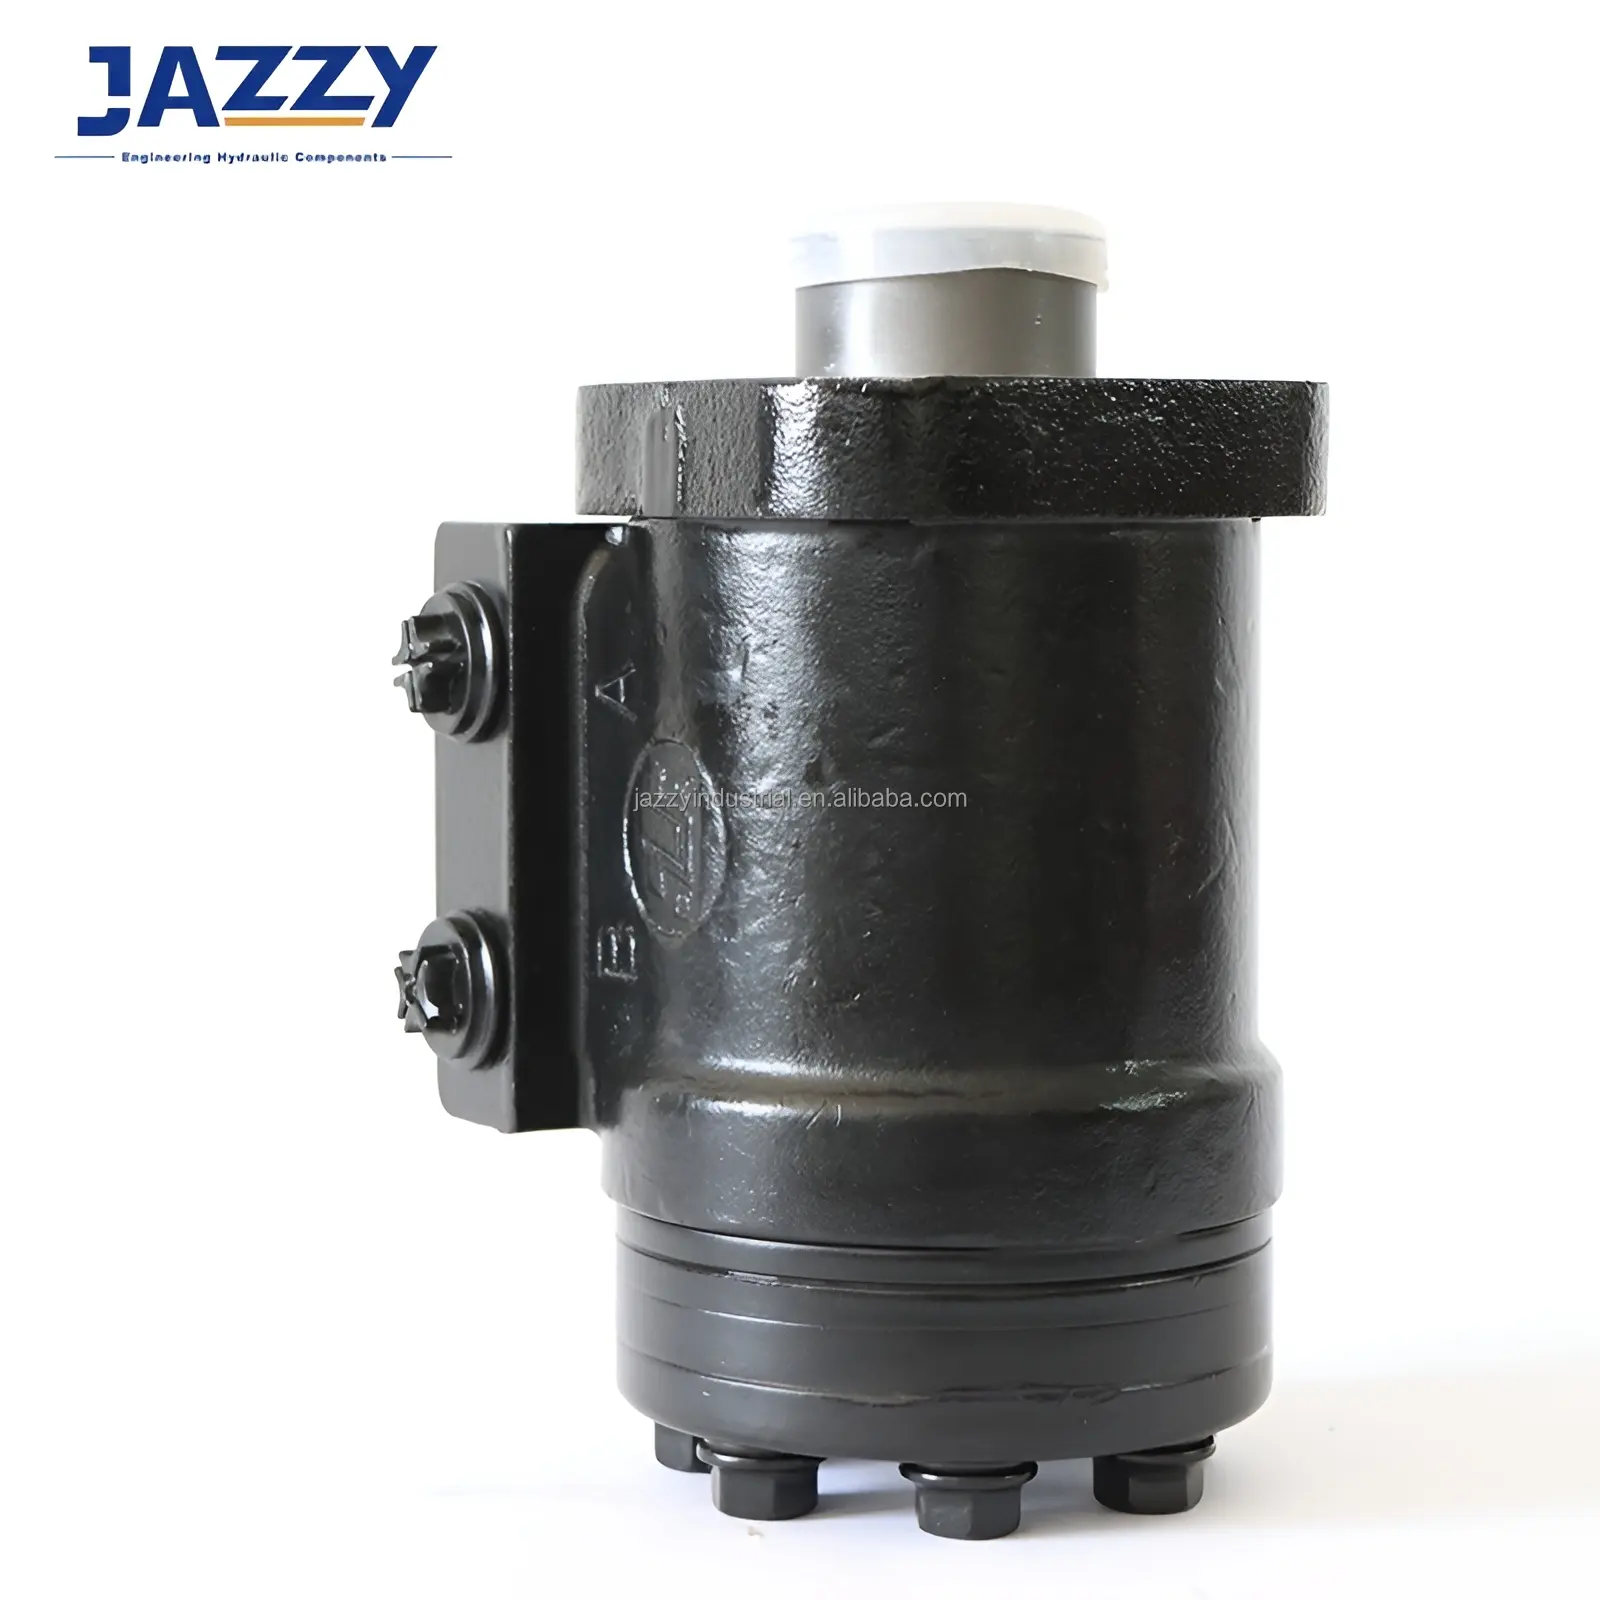 JAZZY BZZ series full hydraulic steering control unit 560 integral large load sensing/low input torque Hydraulic steering unit